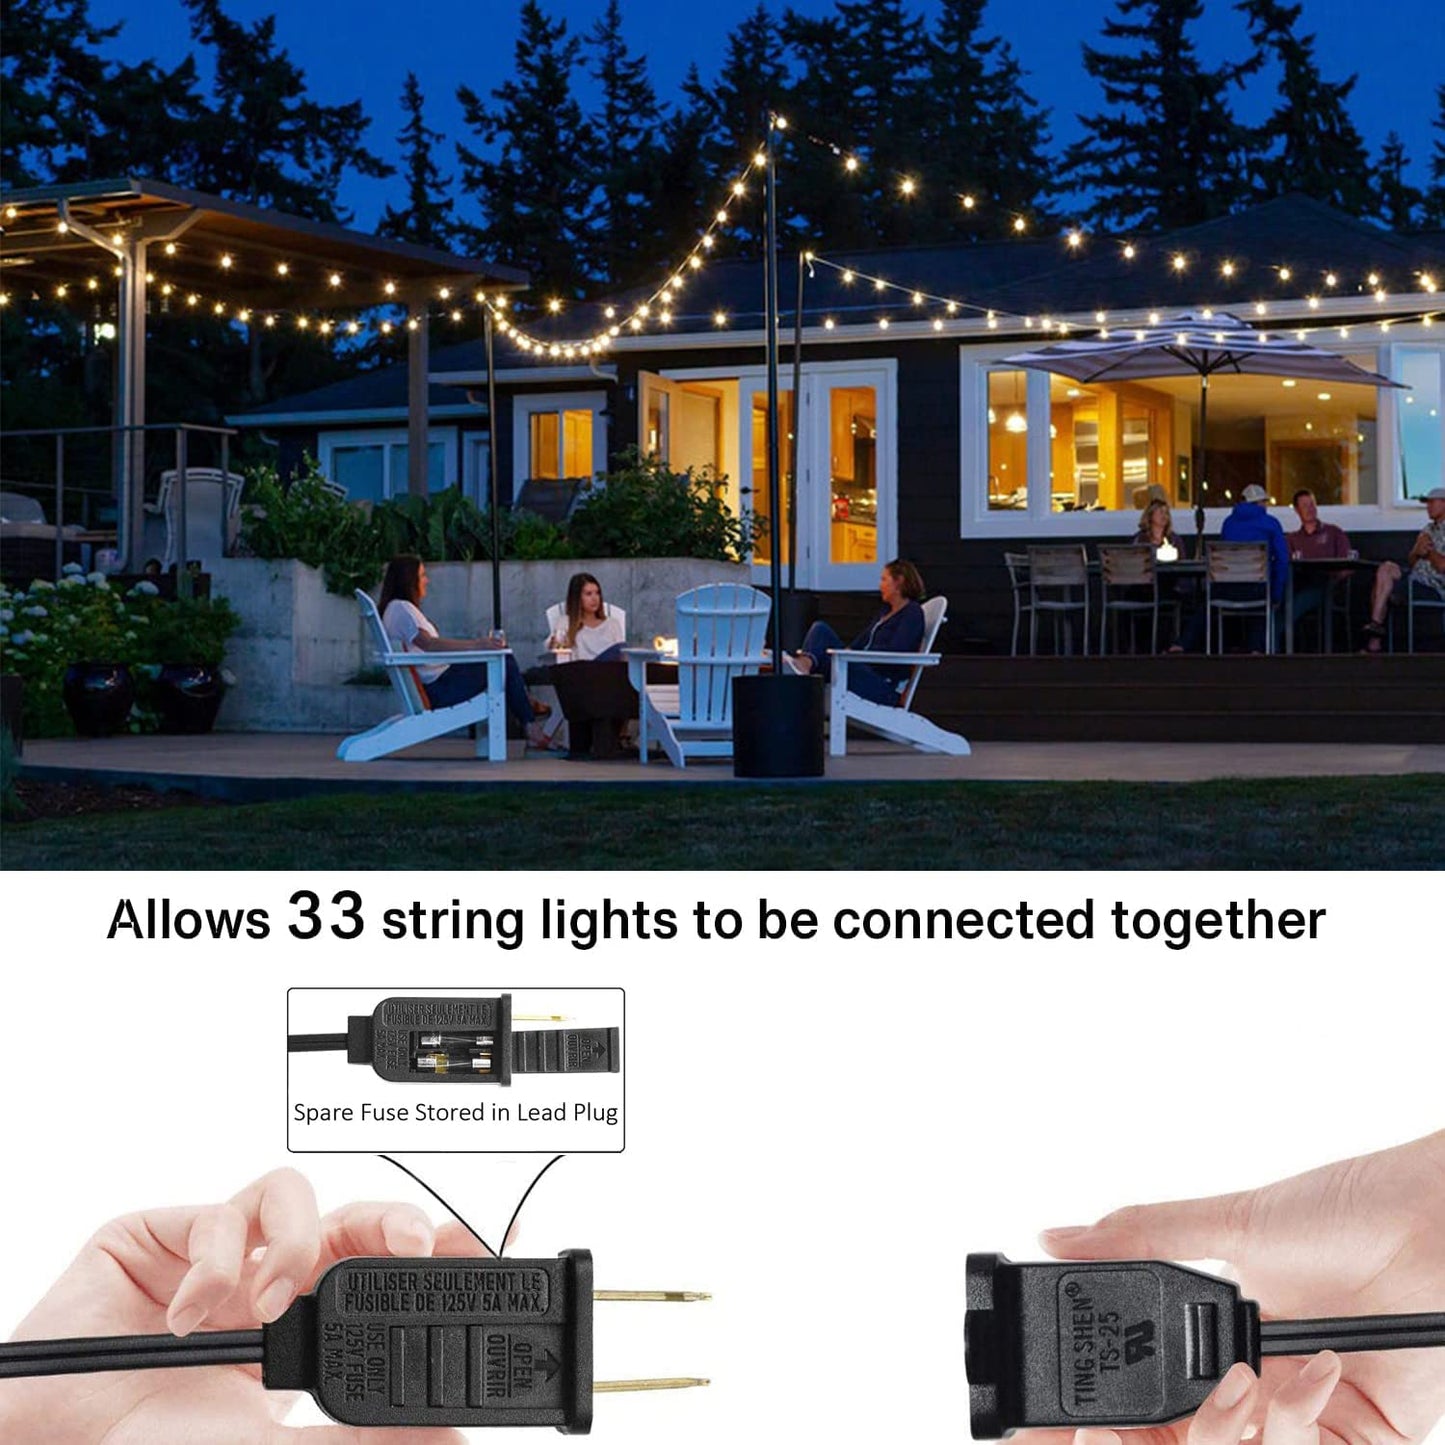 LED Outdoor String Lights Waterproof - 100FT 2 Pack Patio Lights with 52 Globe Bulbs, Connectable Commercial Hanging Lights for Outside Backyard Balcony Party